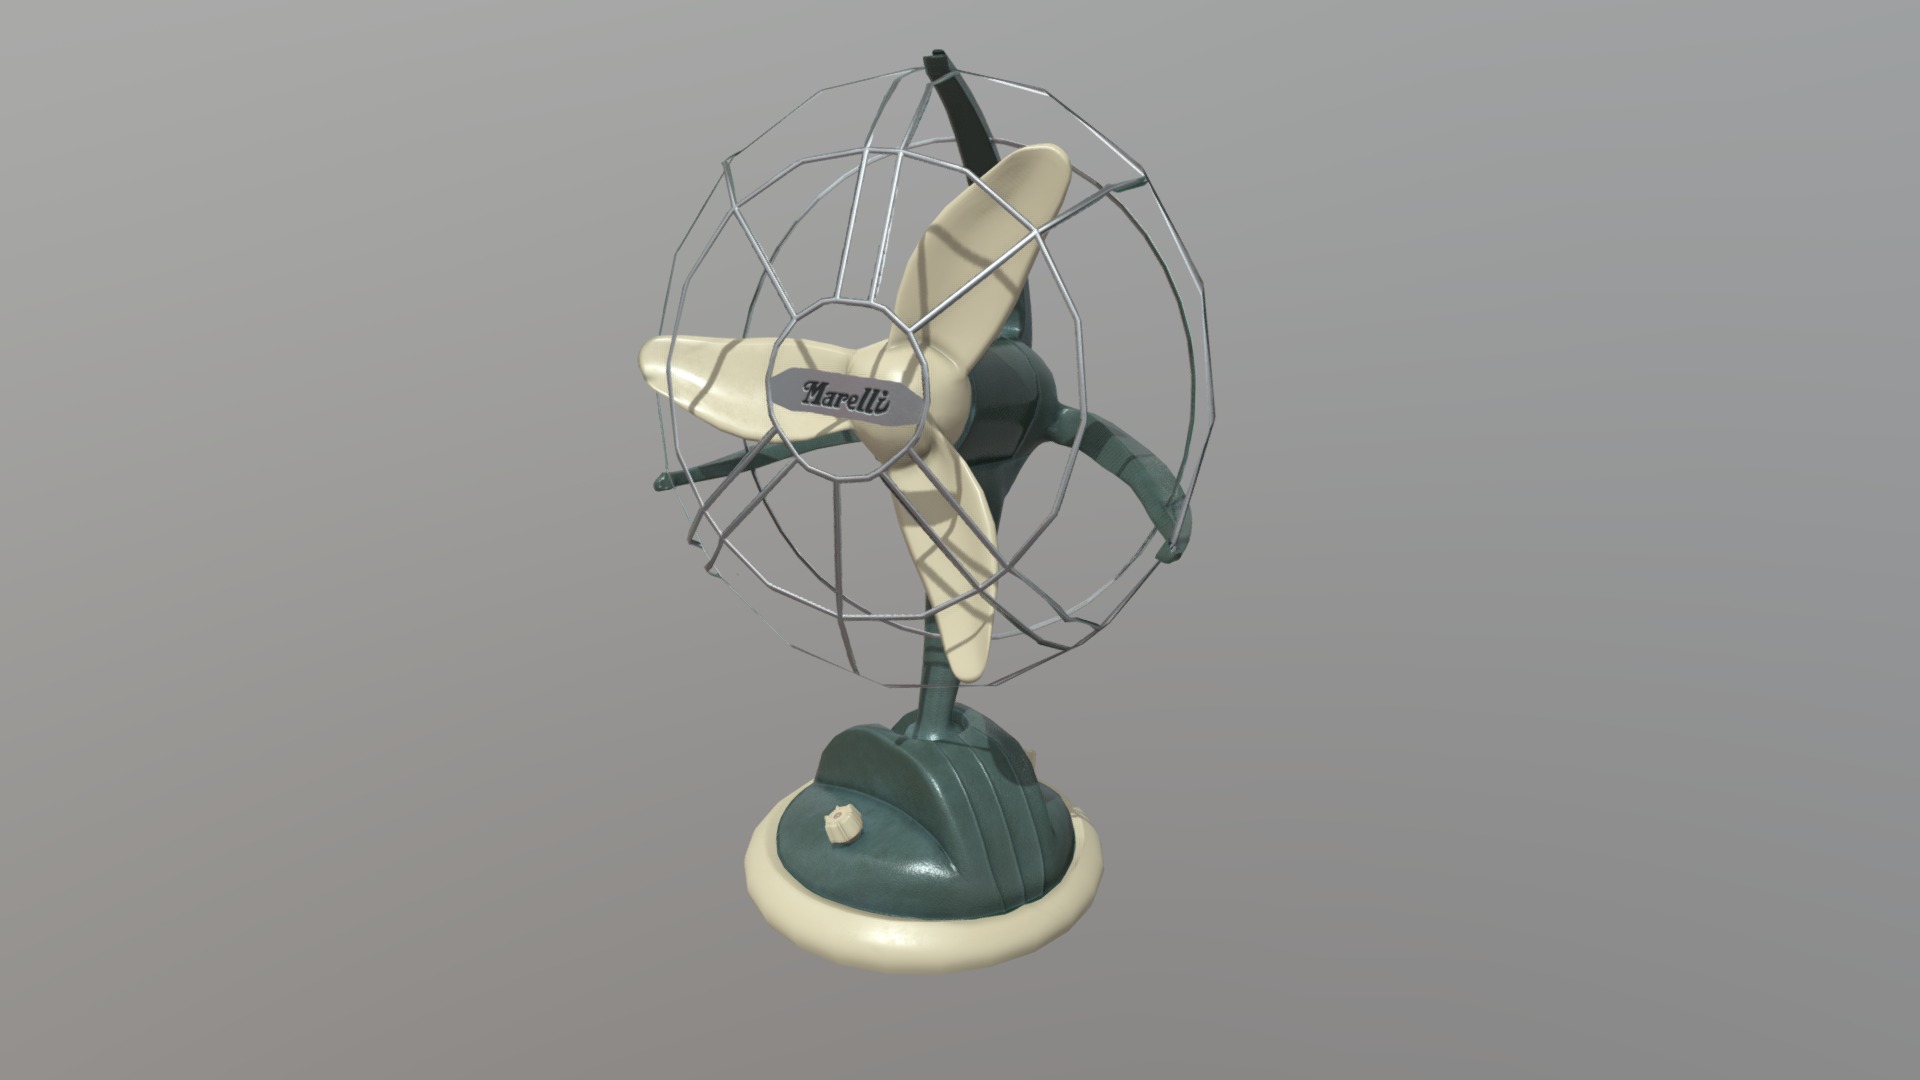 3D model Vintage desk fan Marelli - This is a 3D model of the Vintage desk fan Marelli. The 3D model is about a satellite in space.